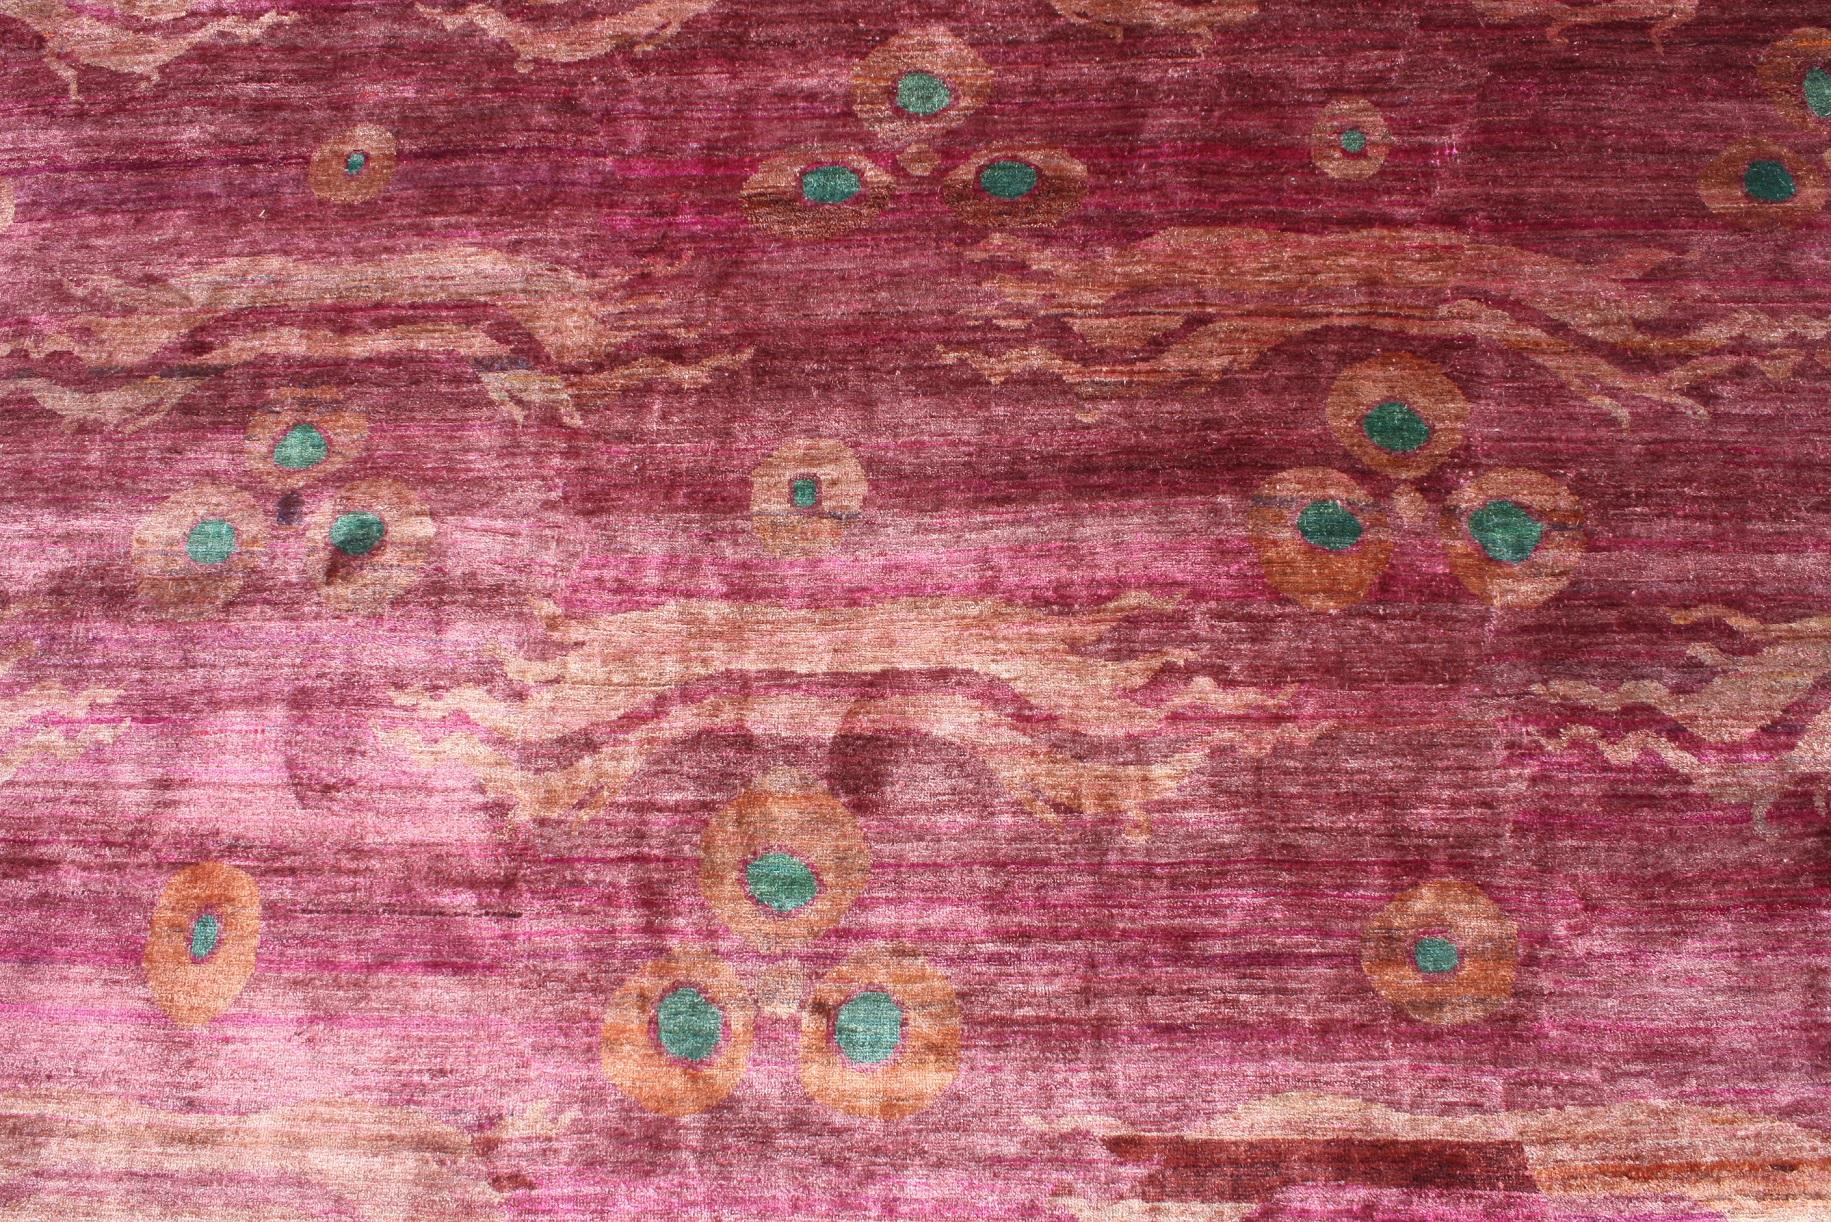 Organic Modern Pink Fuchsia Teal Chinese Design Hand Knotted Soft Natural Silk Ikat Rug For Sale